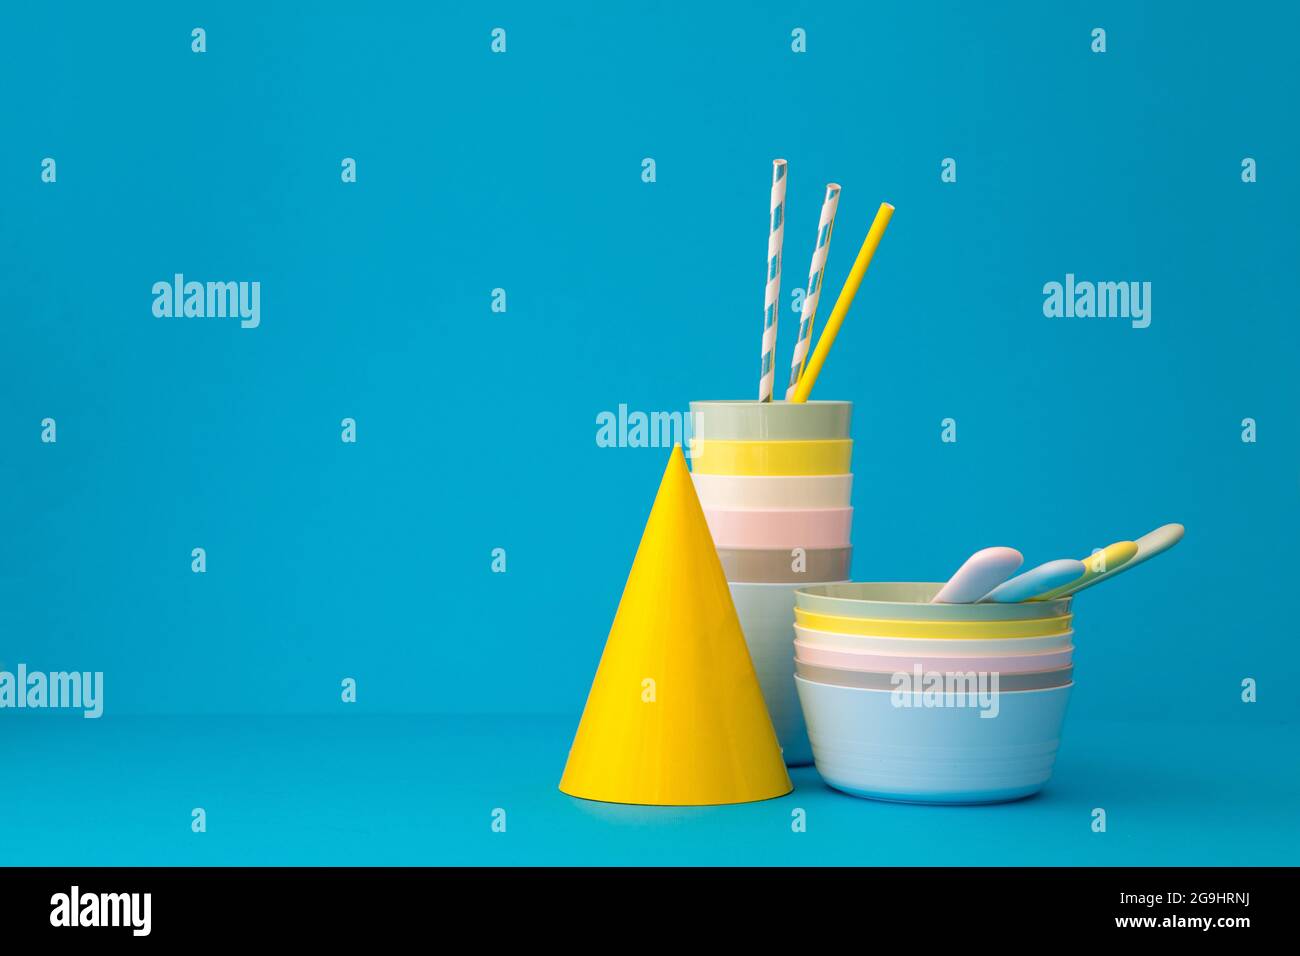 Composition with multicolored plastic reusable tableware with straws and bright yellow party hat on blue background Stock Photo